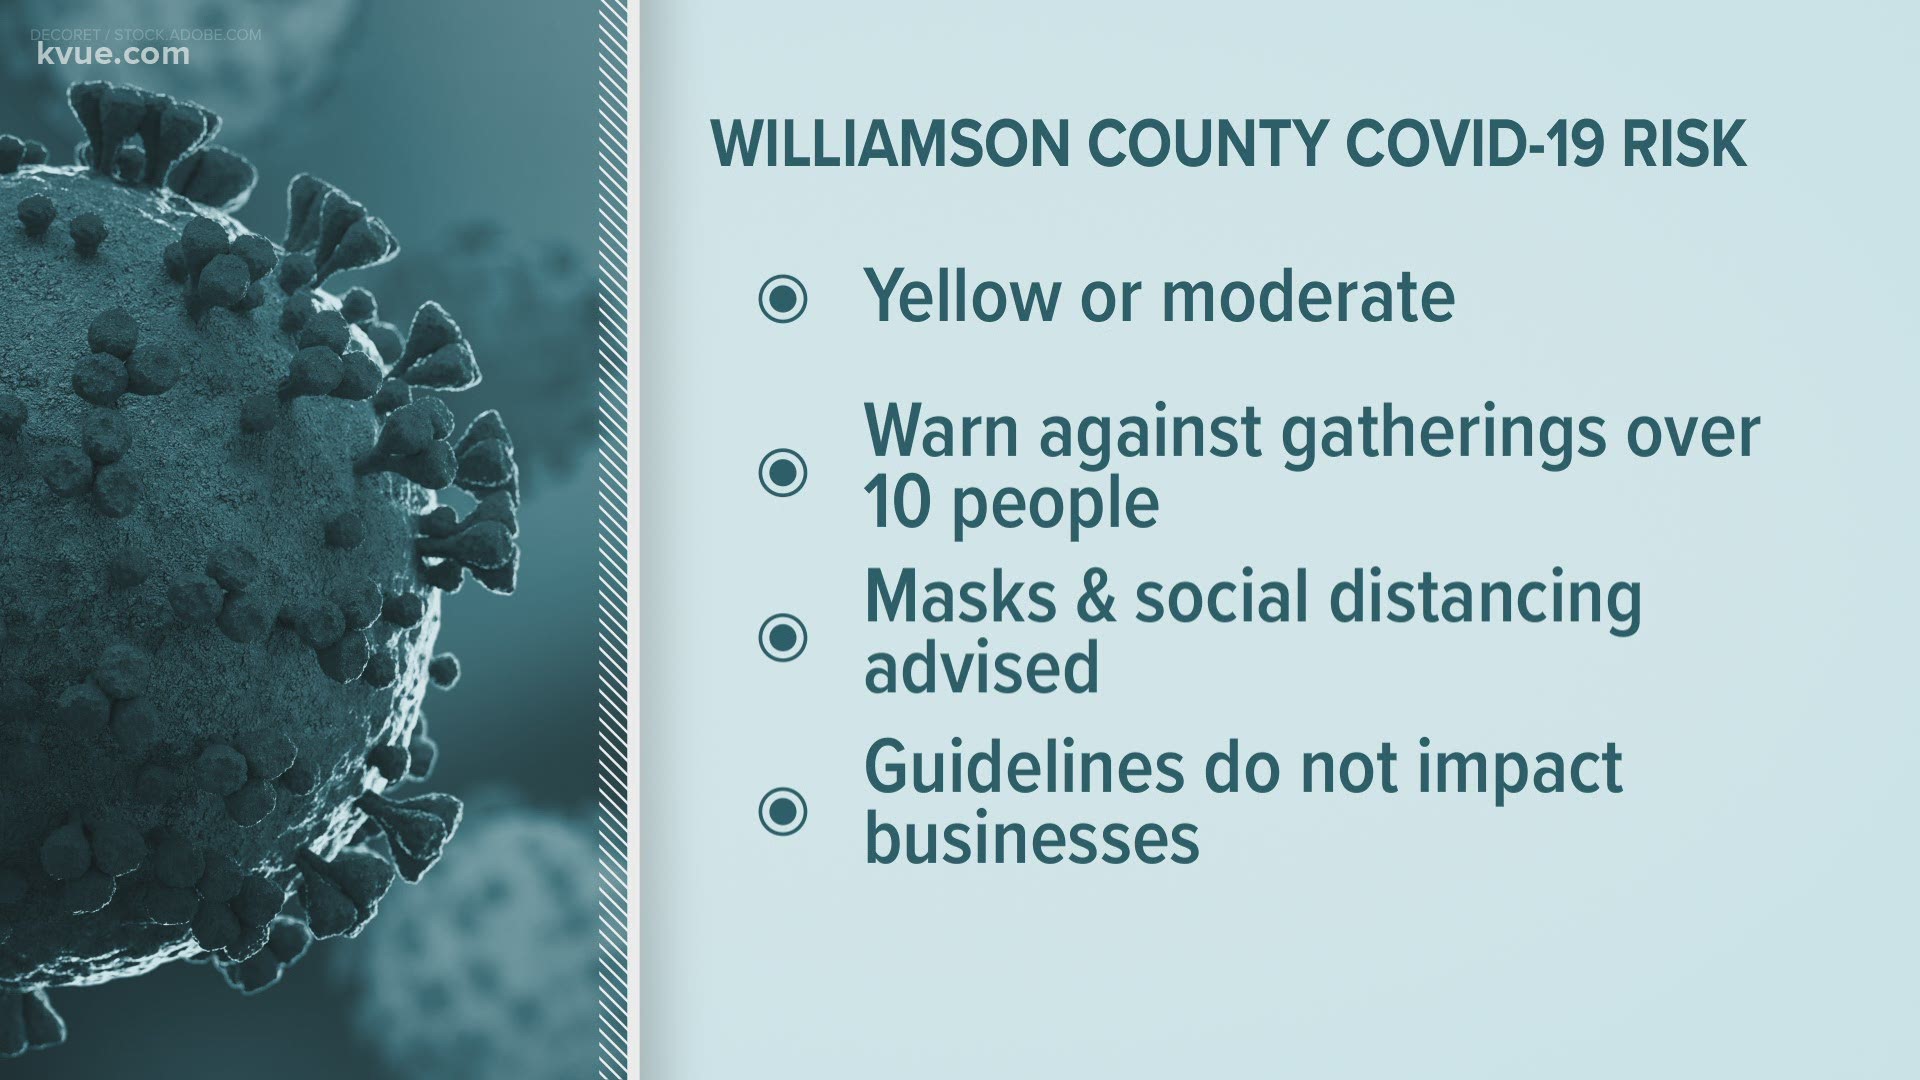 The Yellow Phase means that there is a moderate spread of the coronavirus within the community.